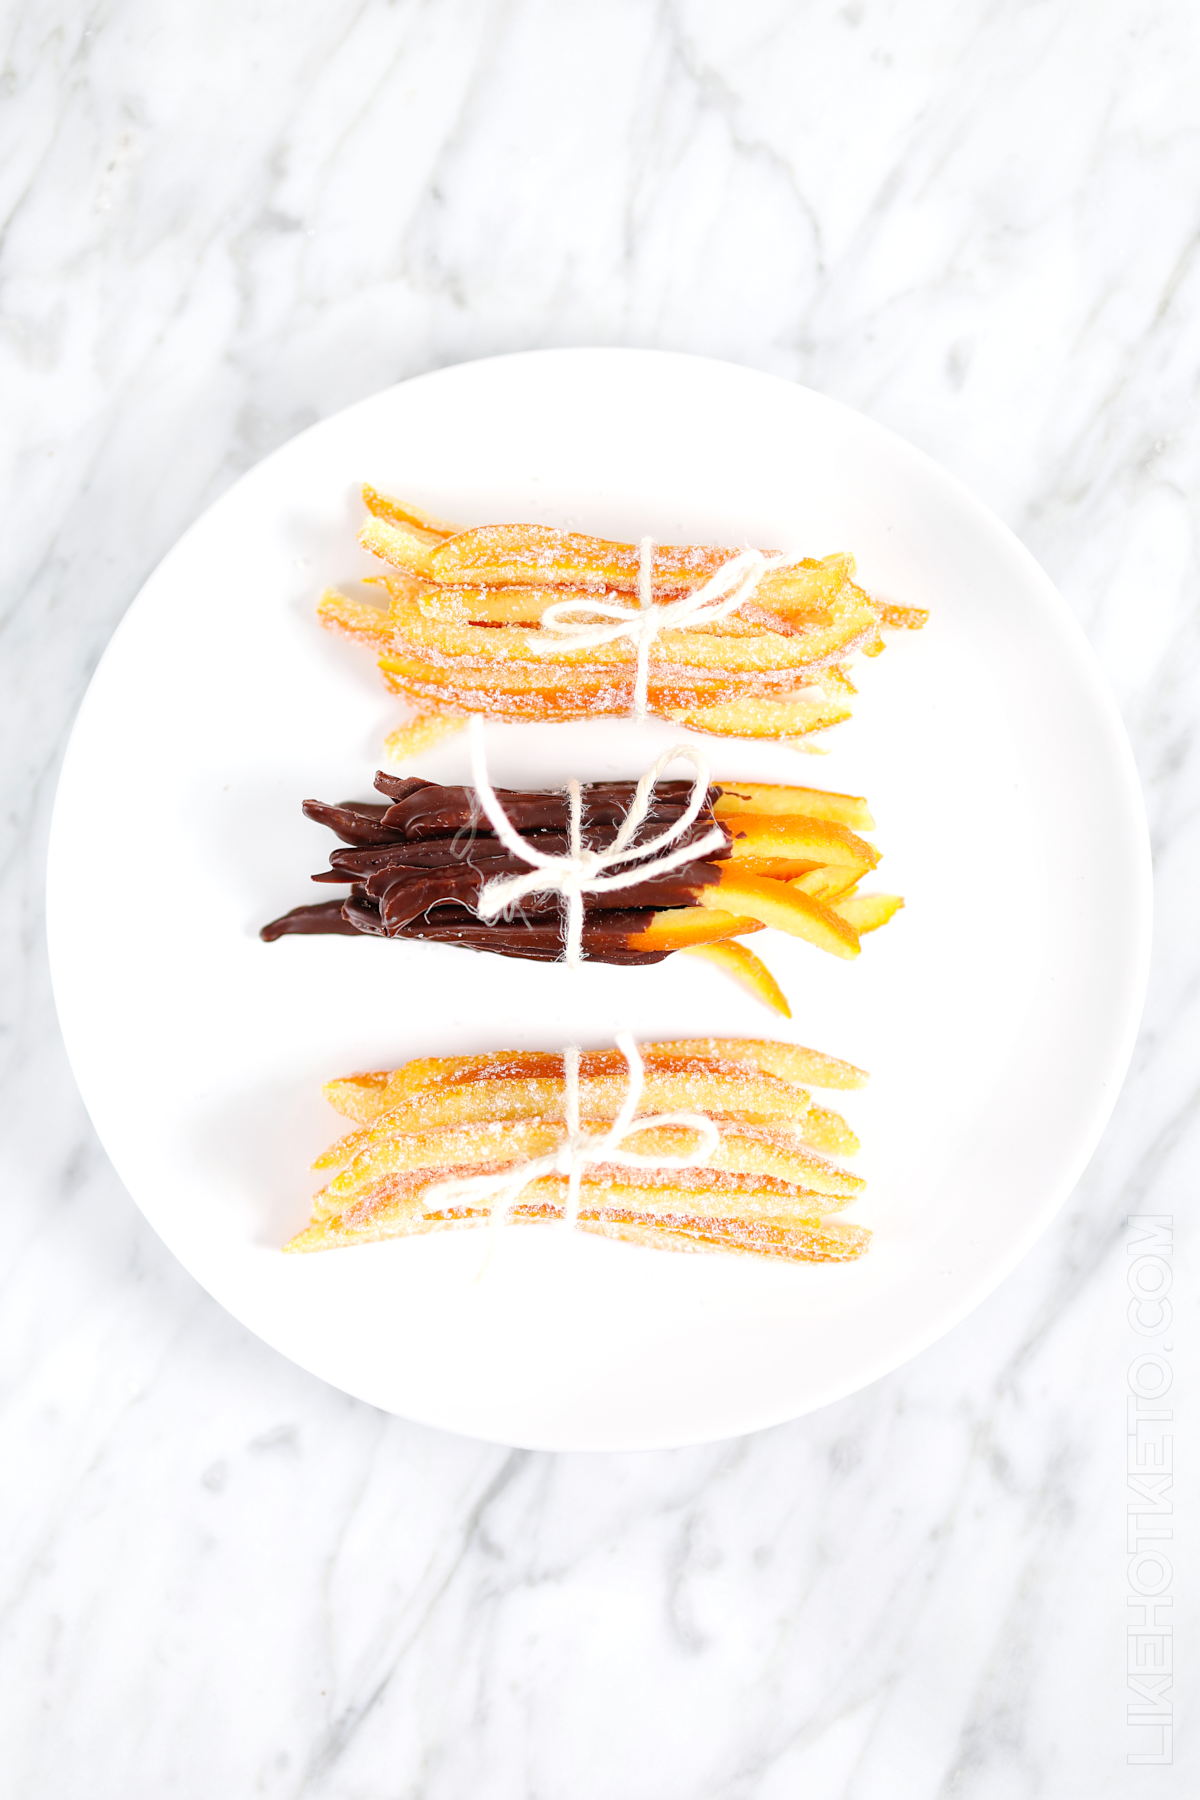 Bundles of sugar-free candied orange peels, dipped in chocolate ad in granulated sweetener, tied up with strings on a plate.